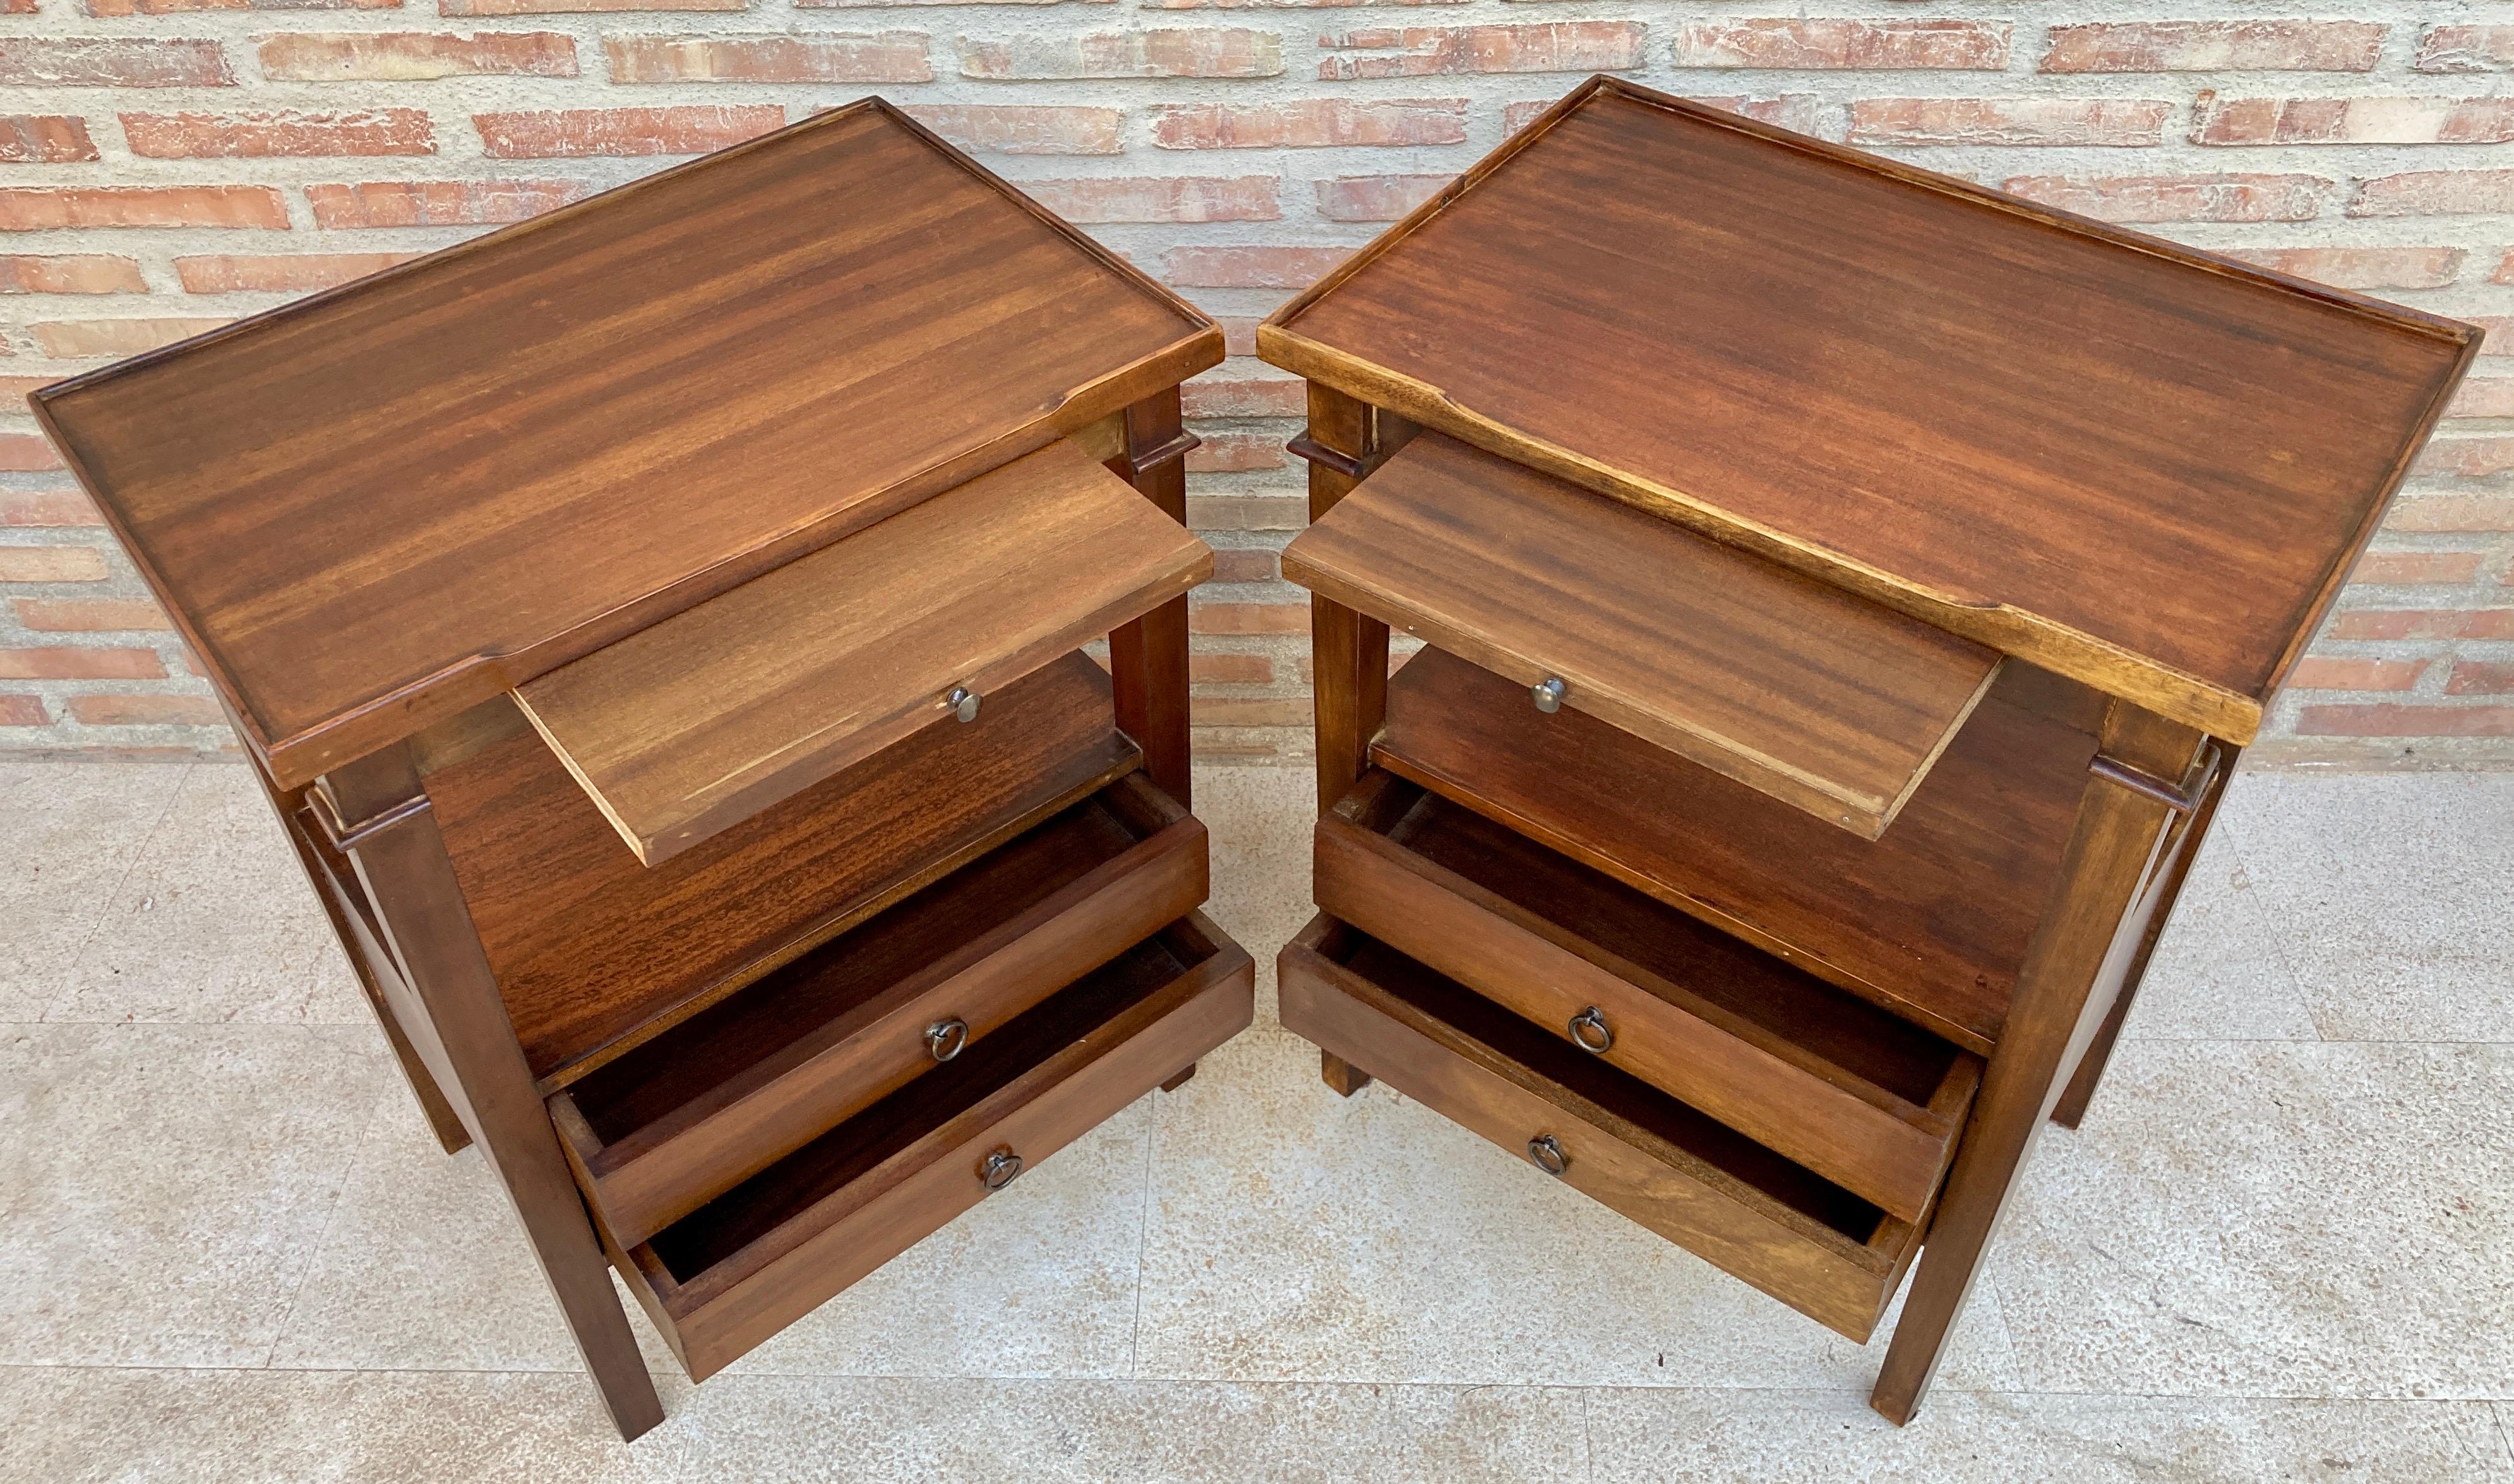 Early 20th Century Pair of French walnut nightstands or side tables with One Removable Shelf and Two Drawers. 
Pair of early 20th century French walnut nightstands or side tables. 
A pair of fine French nightstands or walnut nightstands. Each one